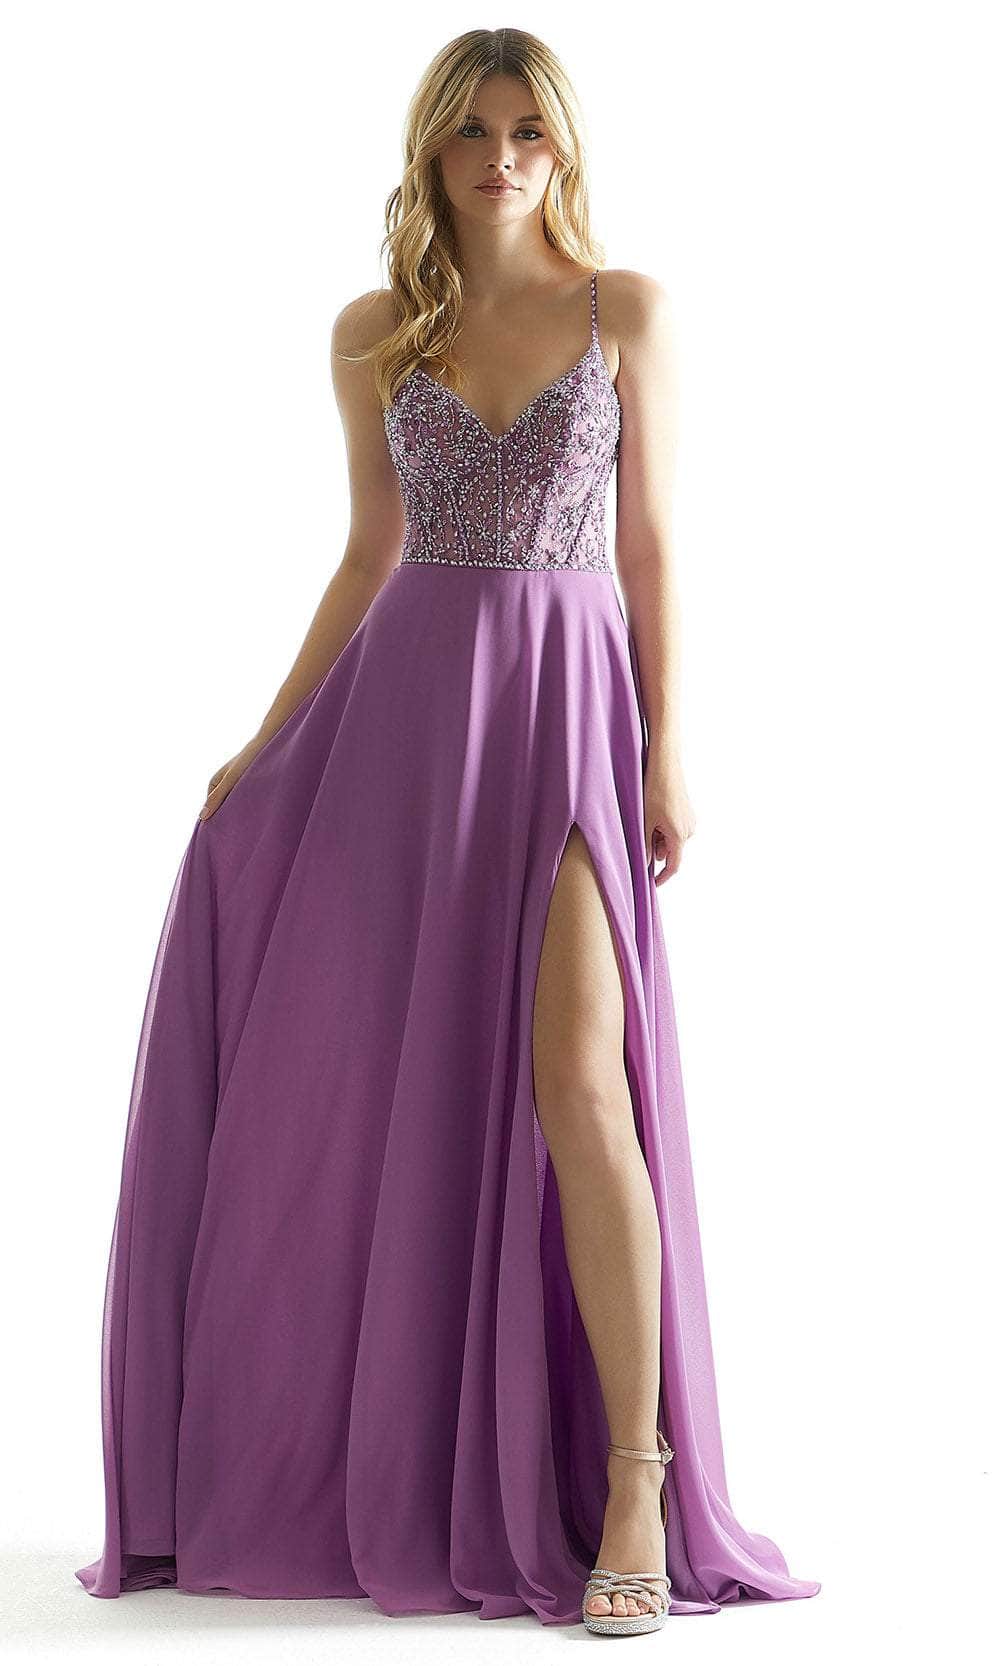 Image of Mori Lee 49070 - Crystal Beads A-Line Prom Dress